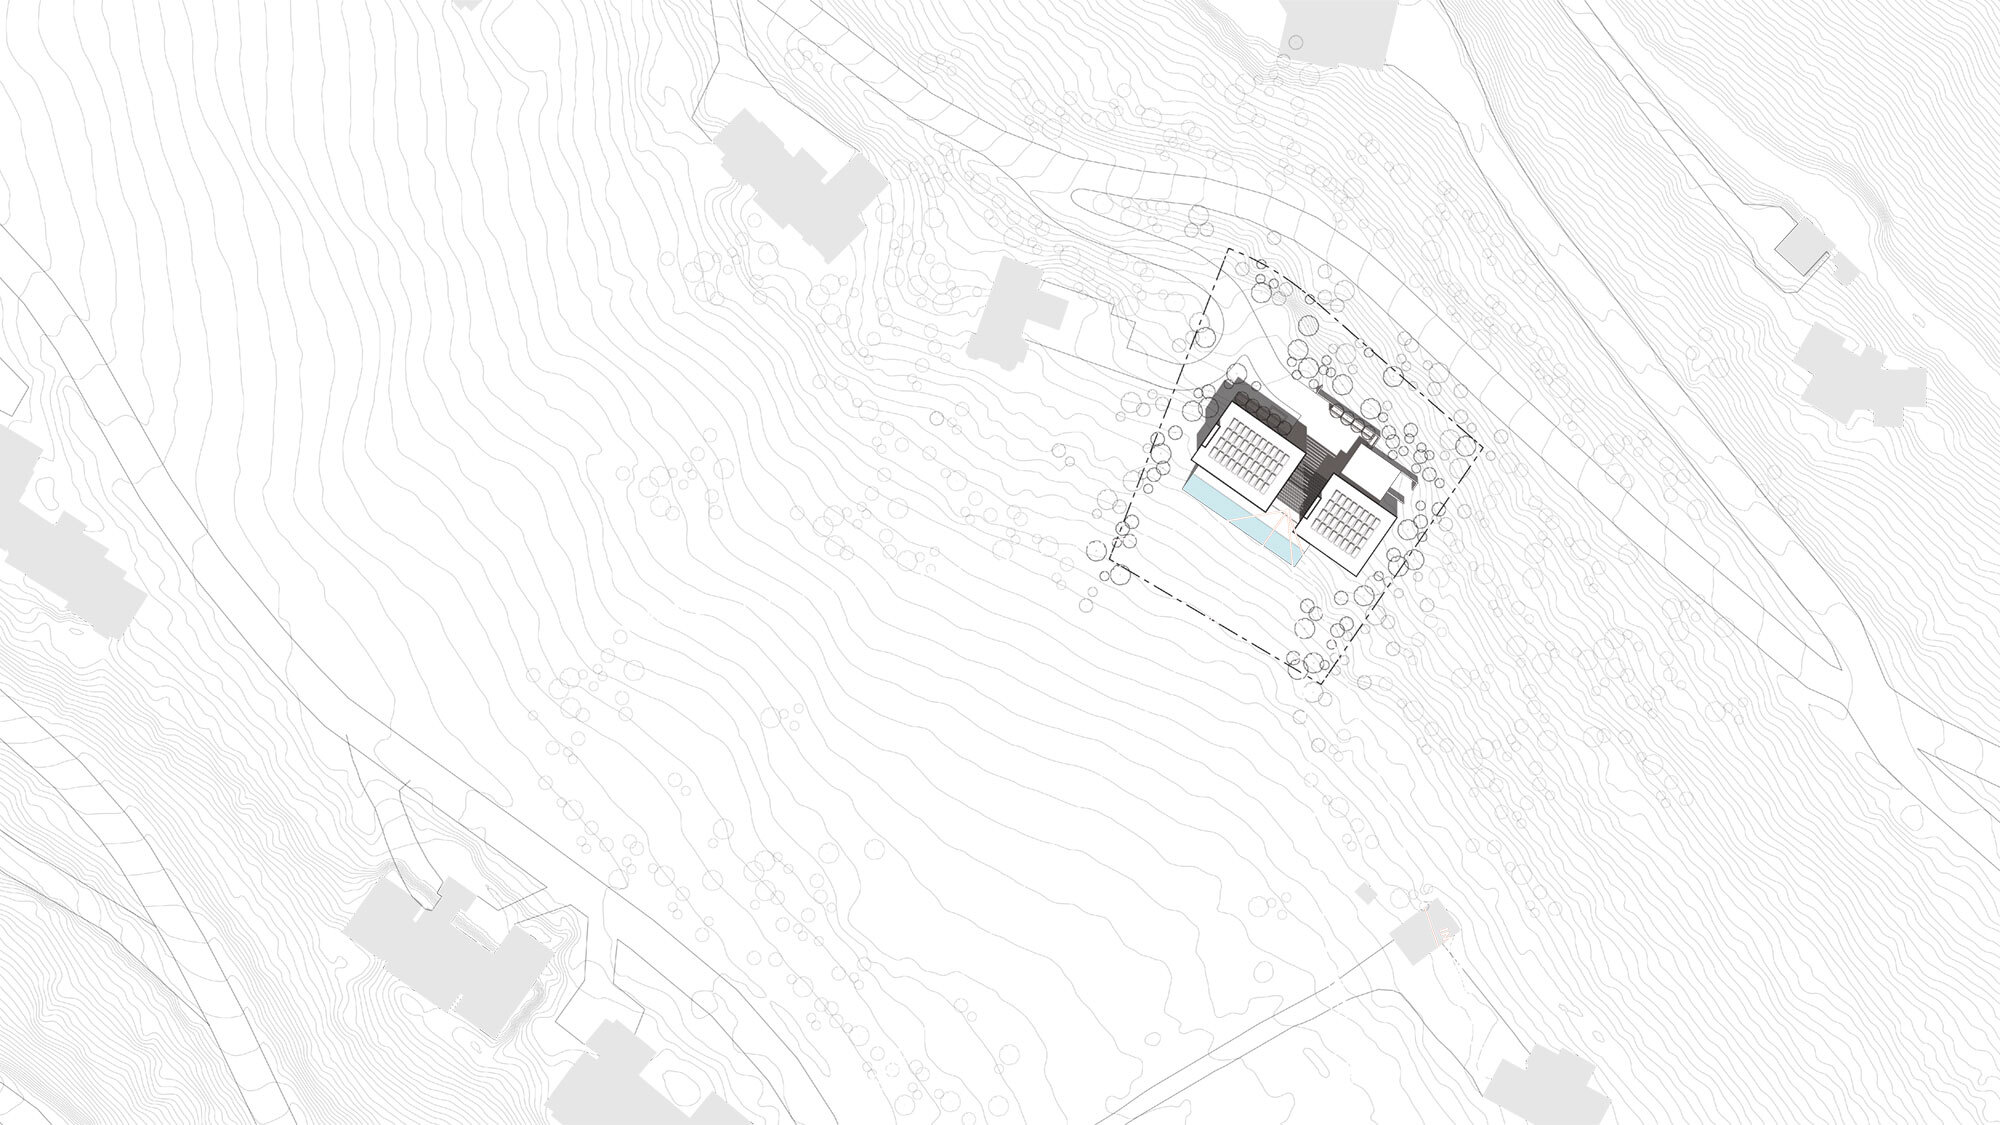 CCY Architects Pavilion site plan with PV